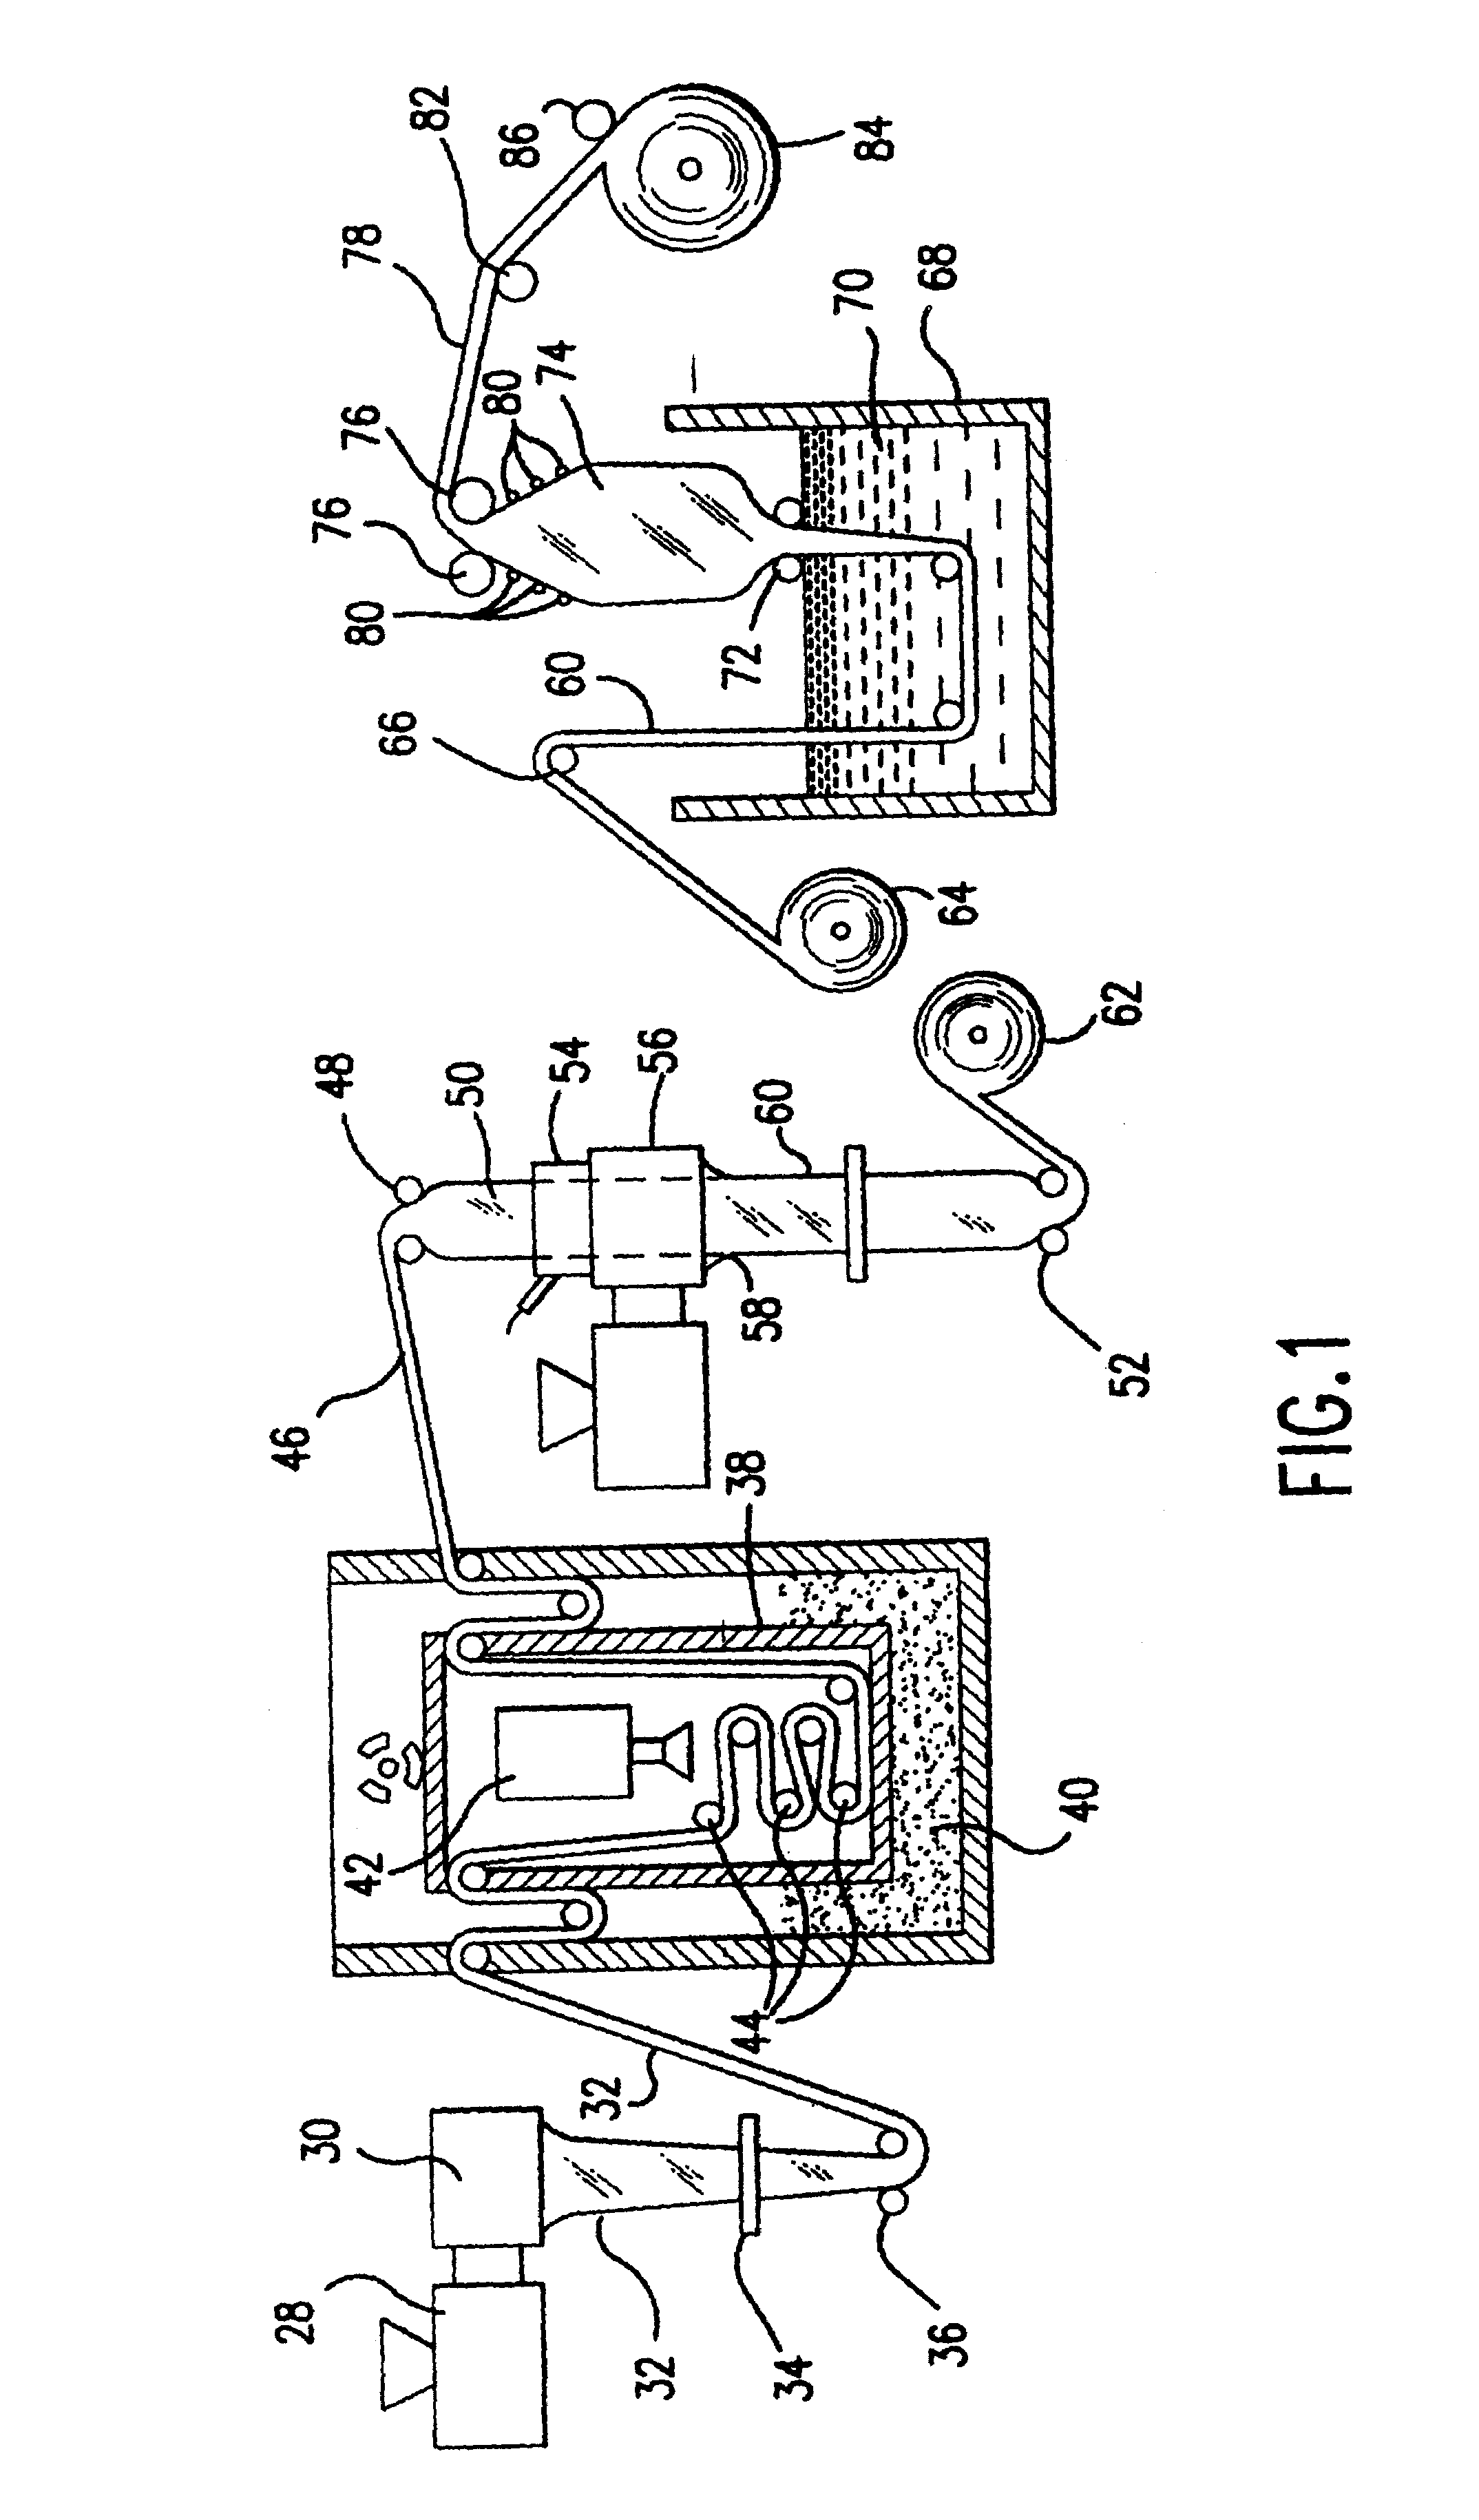 Heat-shrinkable multilayer packaging film comprising inner layer comprising a polyester